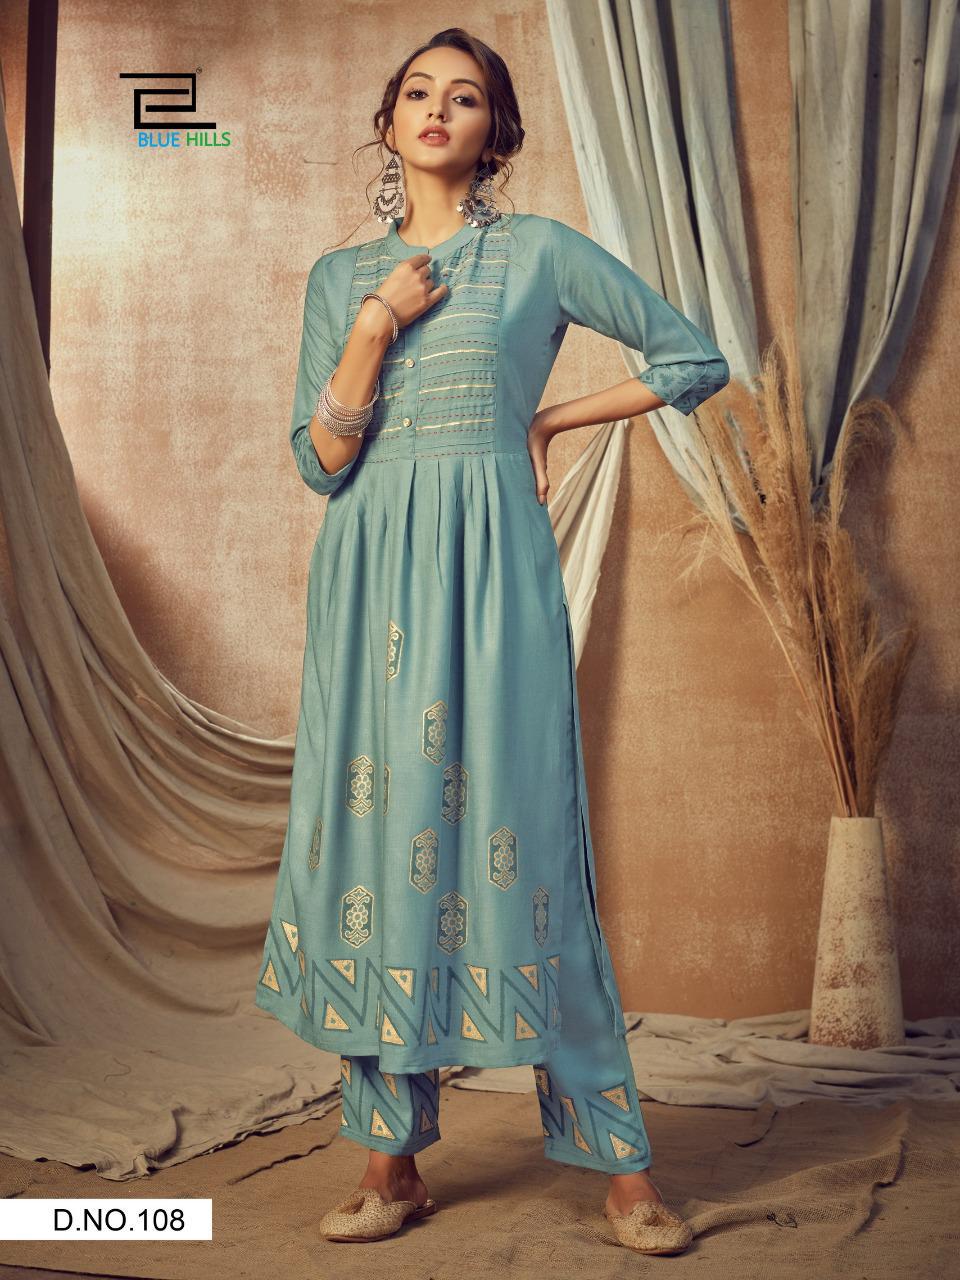 Ethnic Gowns | Women Ethnic Gown | Freeup